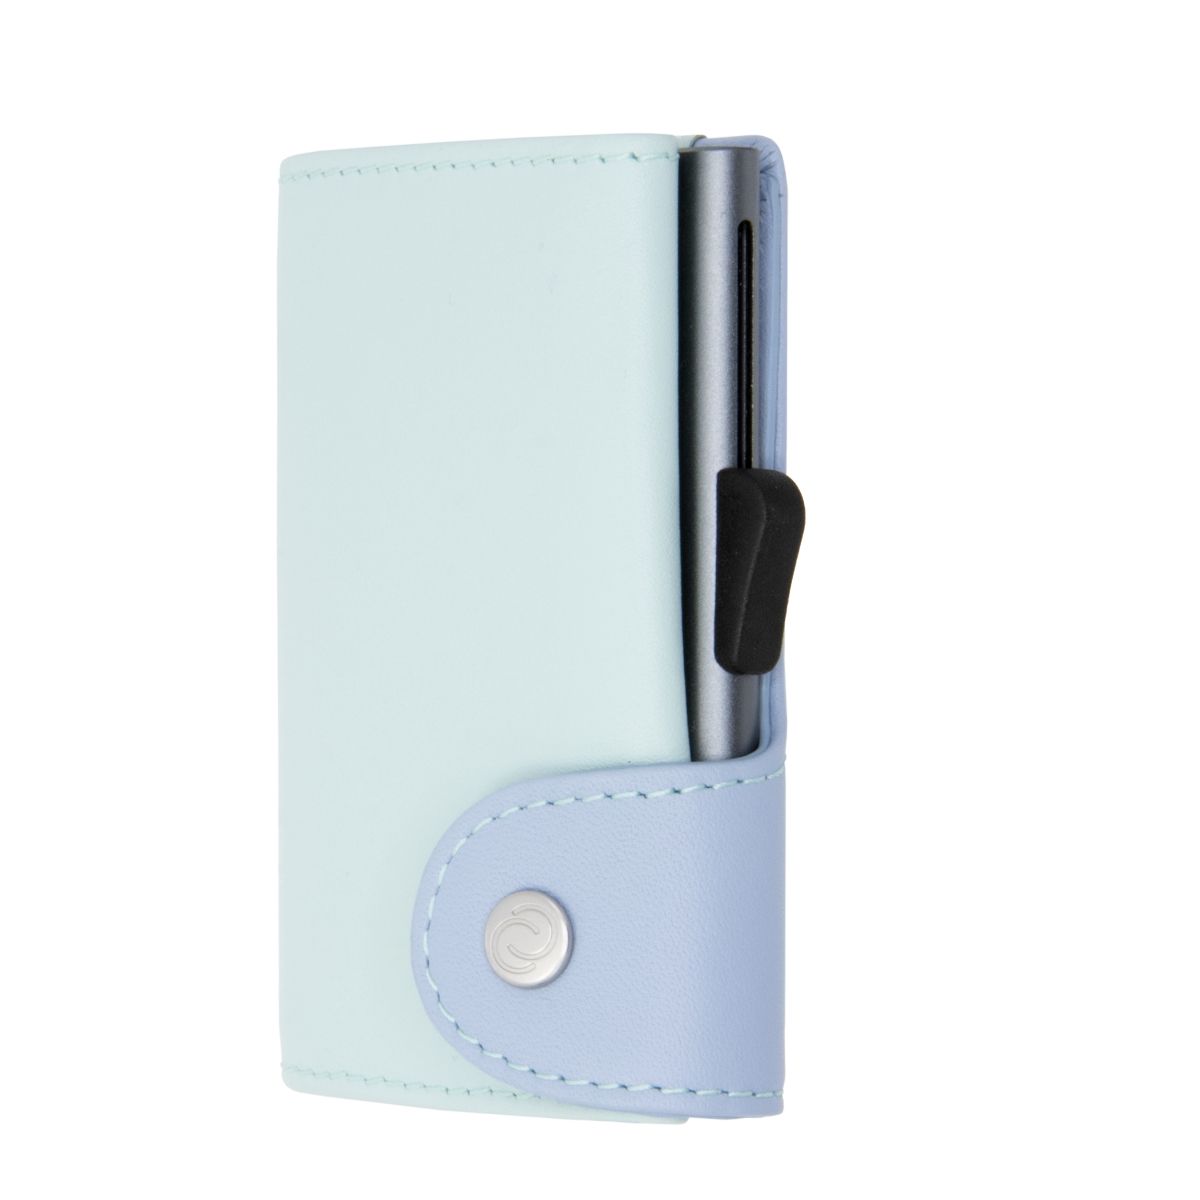 C-Secure Aluminum Card Holder with Genuine Leather and Coin Pouch - Aqua/Ice